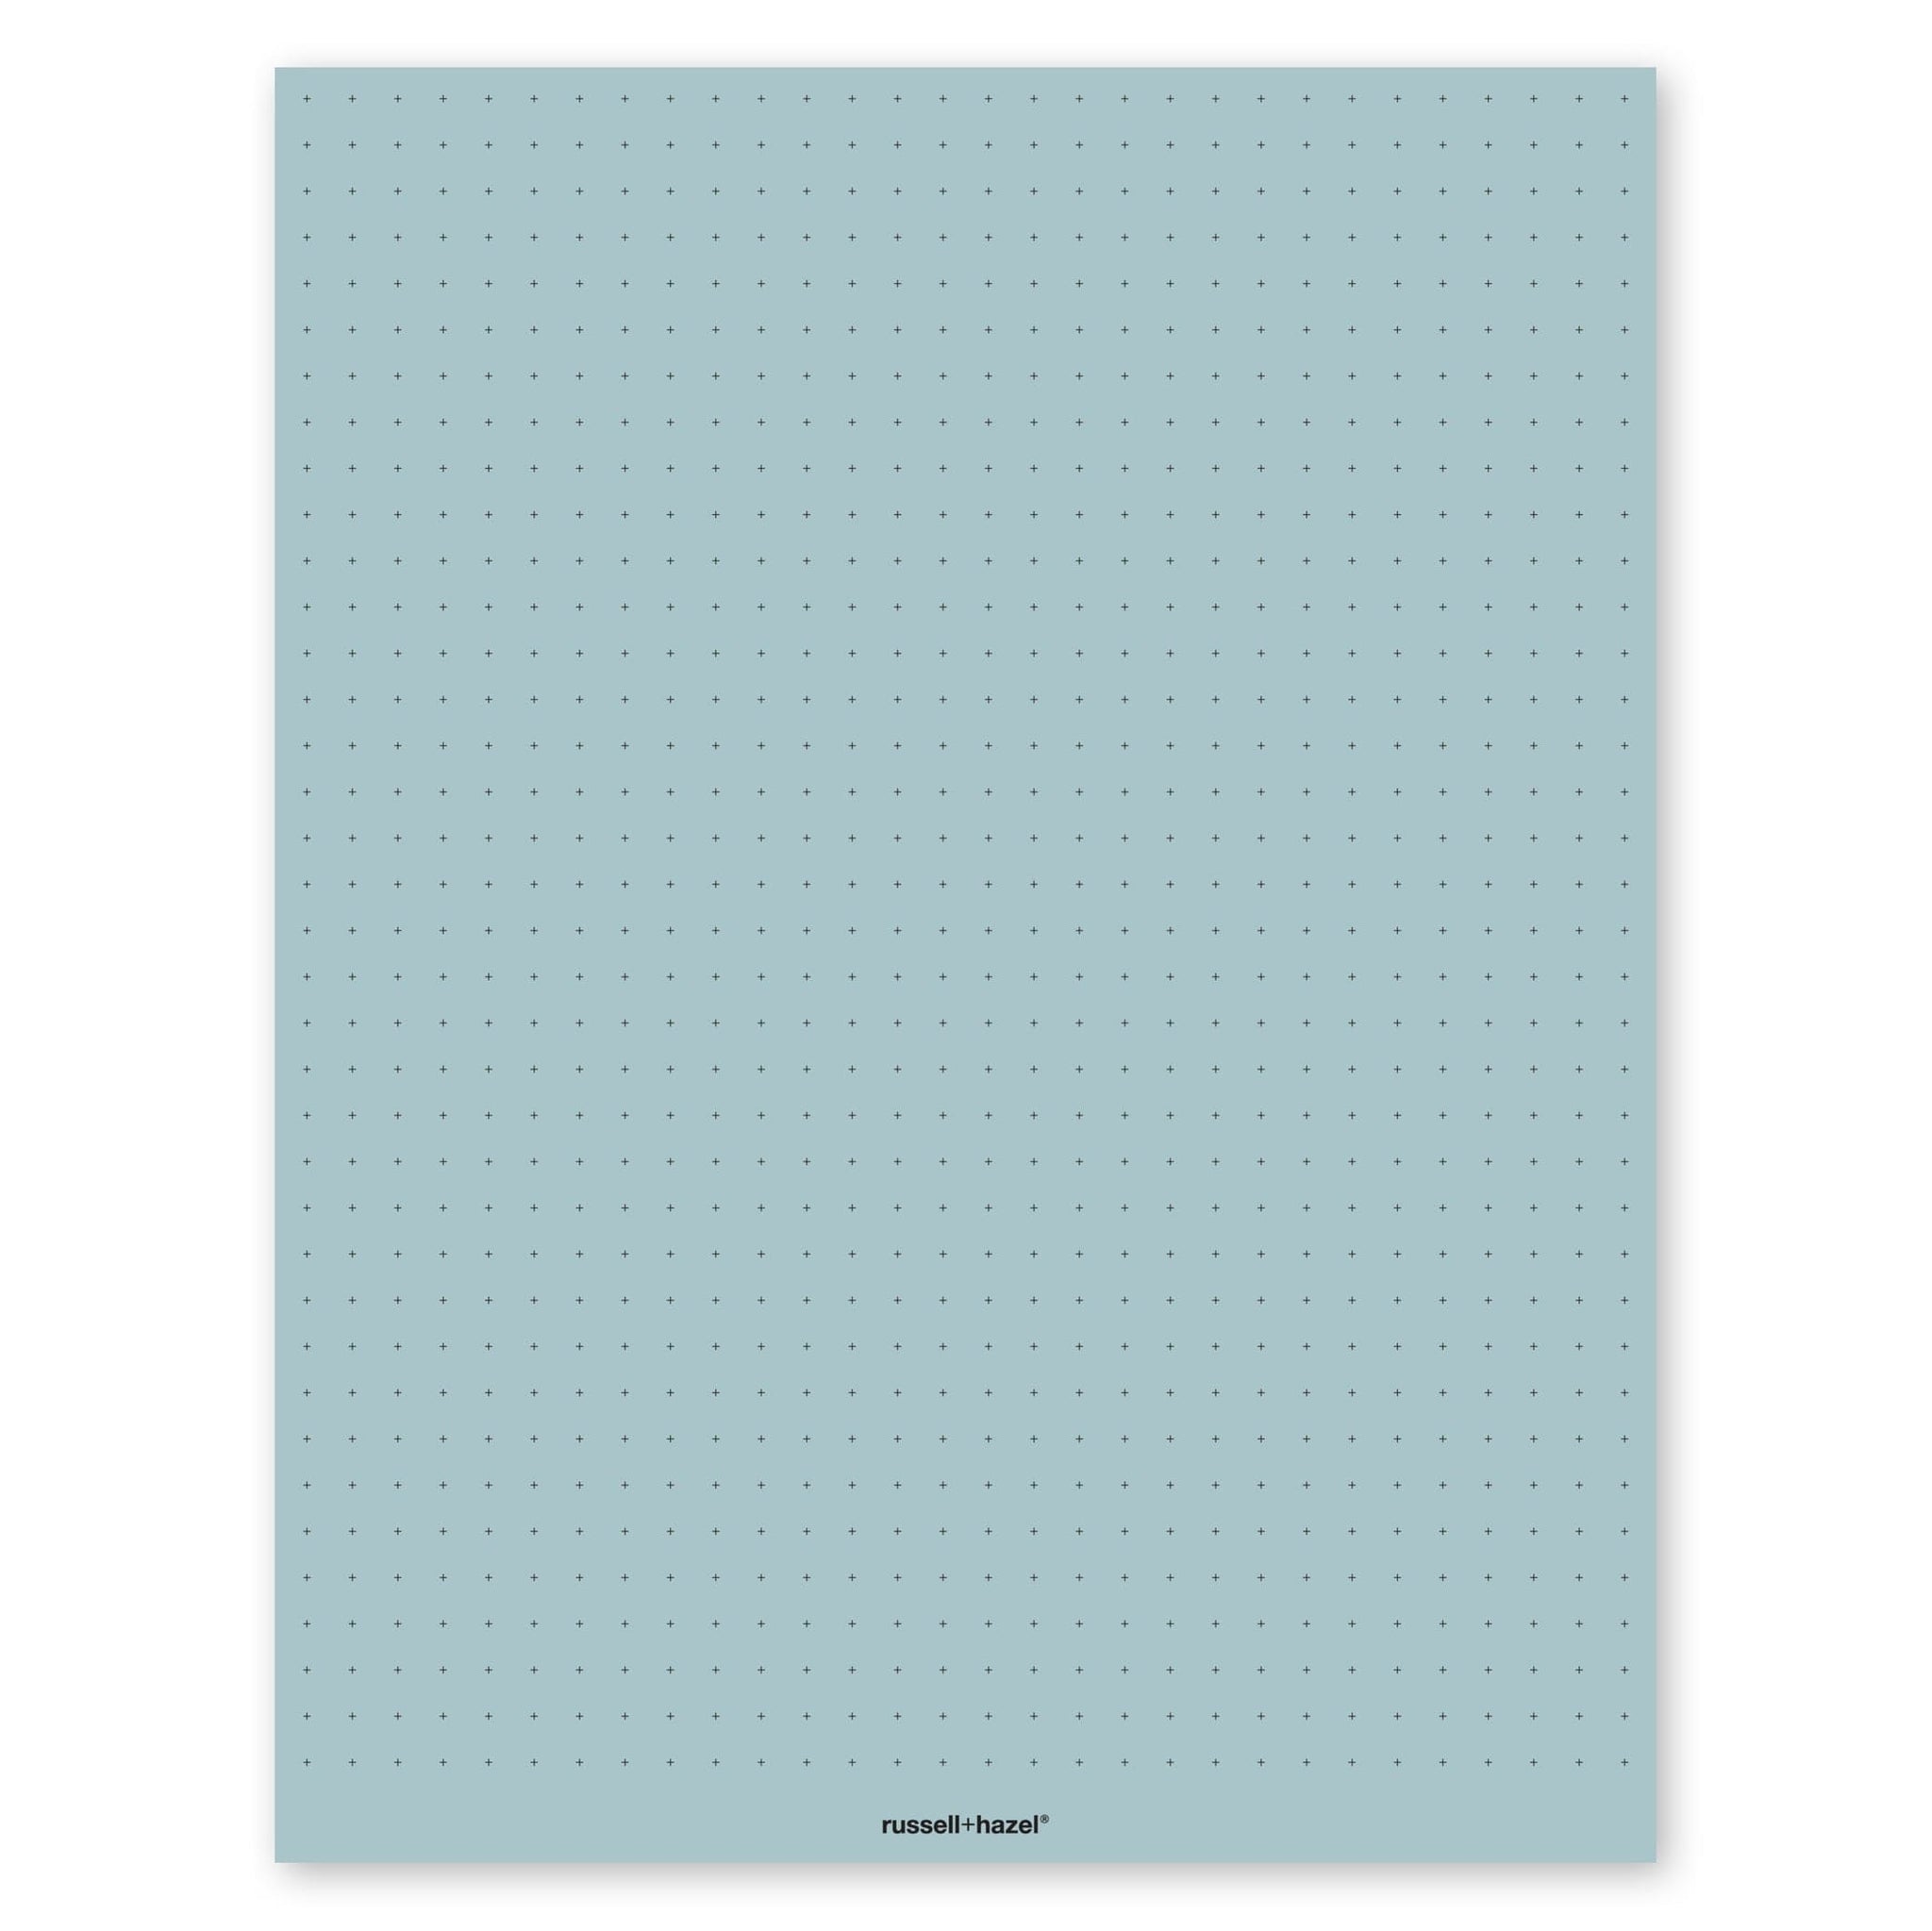  Floral Stationery Paper 50 Sheets 8.5x11, Decorative